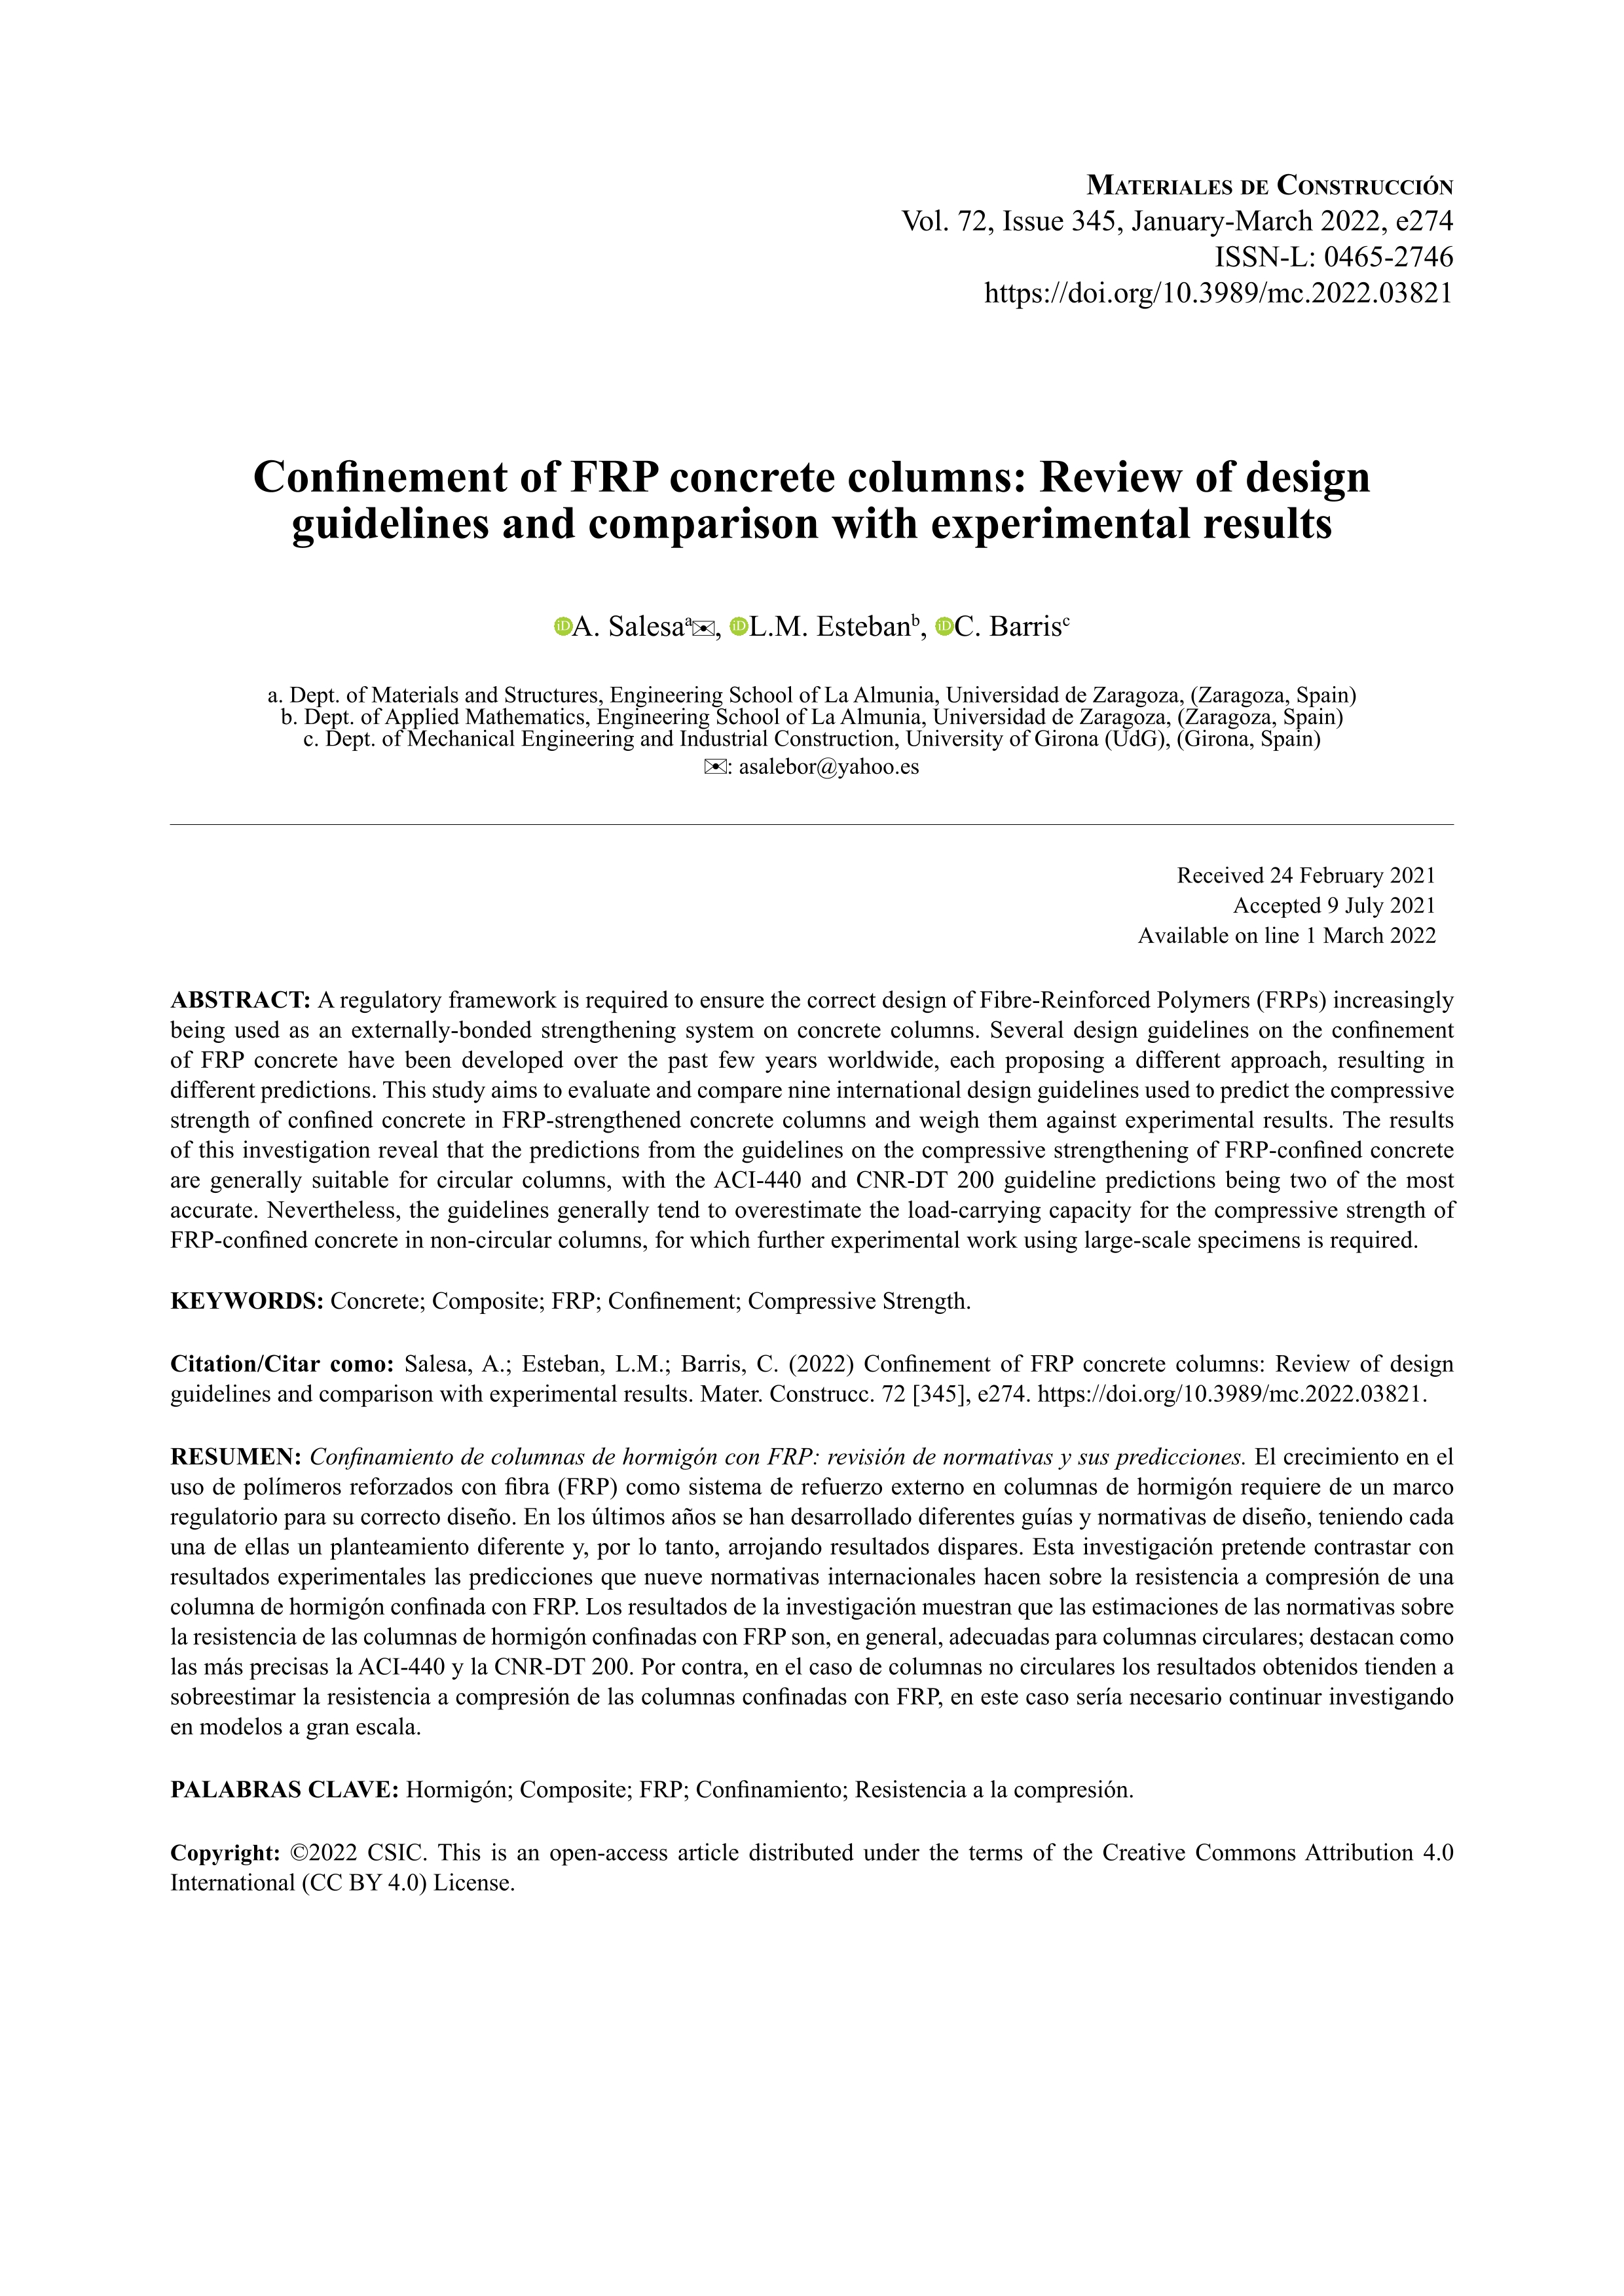 Confinement of FRP concrete columns: Review of design guidelines and comparison with experimental results